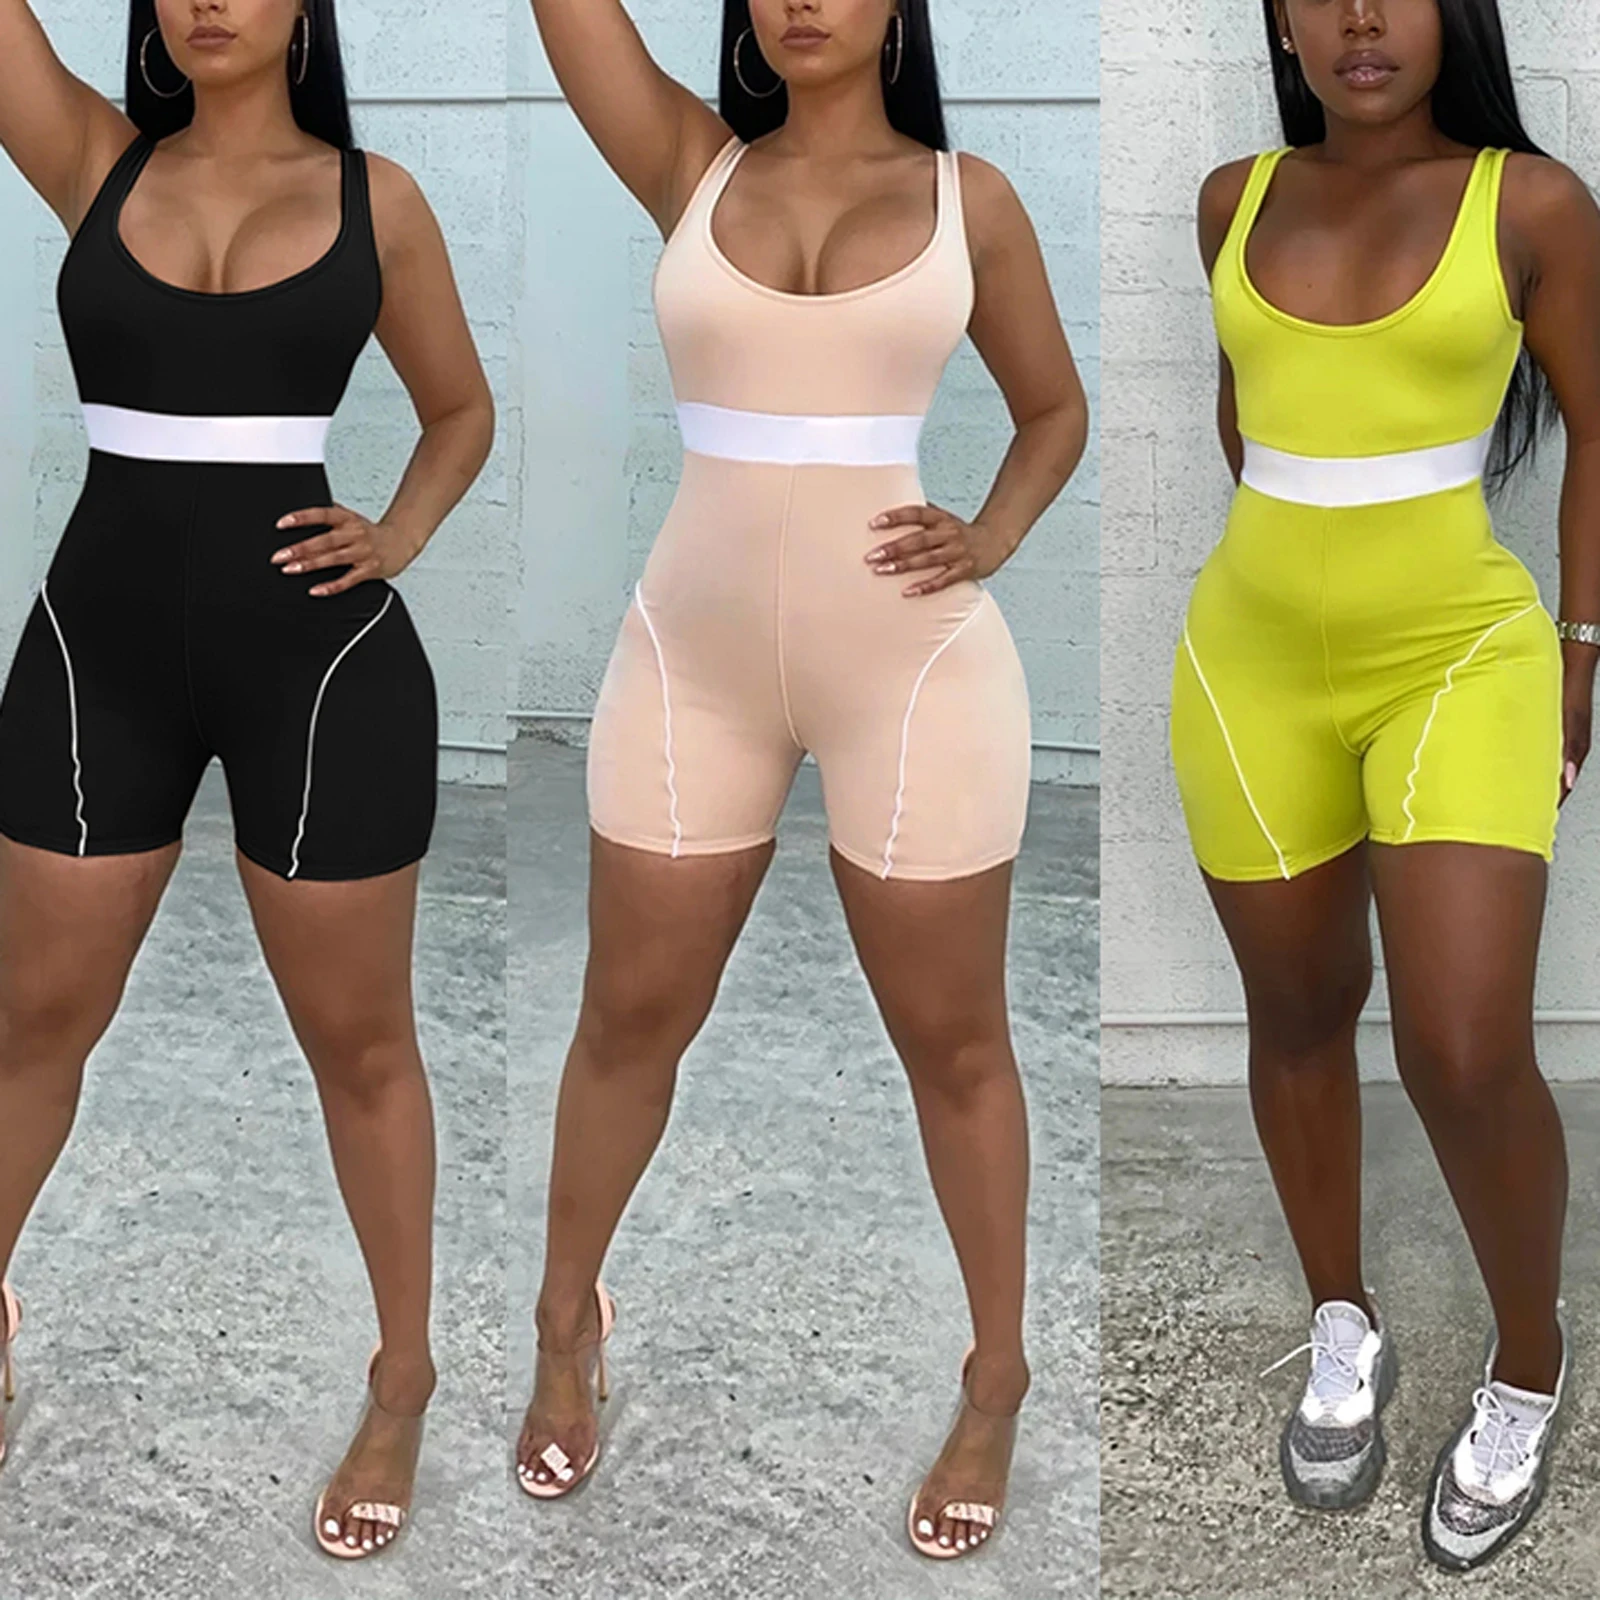 

Women Casual Close-fitting Playsuit, Sleeveless U-shaped Collar Sexy One-piece Black/ Pink/ Florescent Green 2021 New Arrival